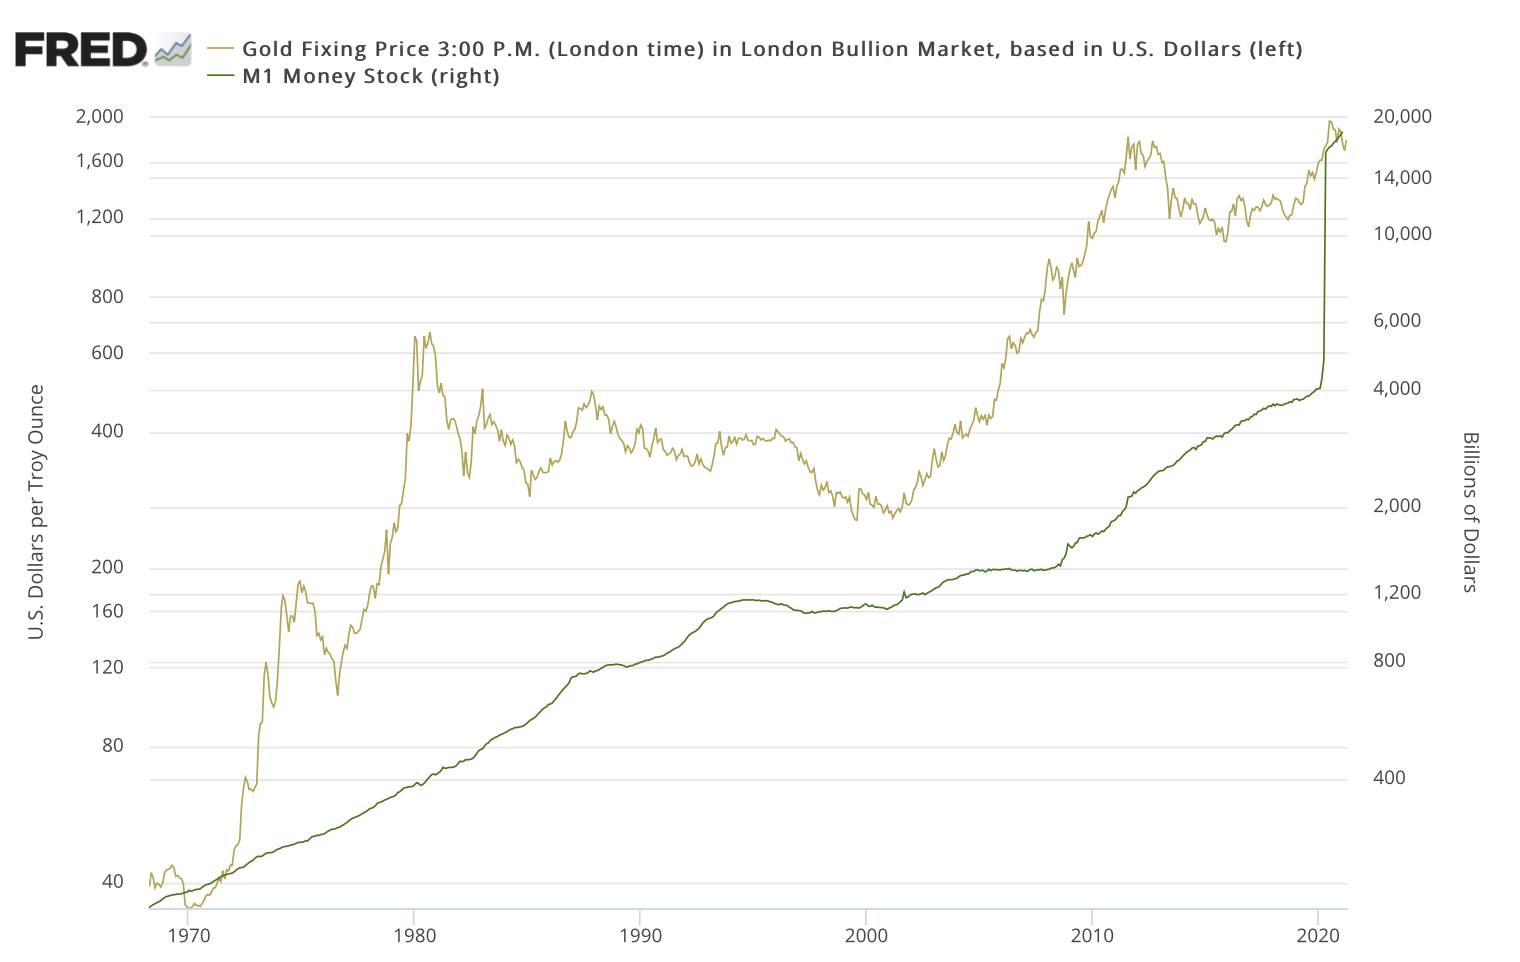 overlay line chart showing gold and M1 money supply drawn in log scale 1970 to present